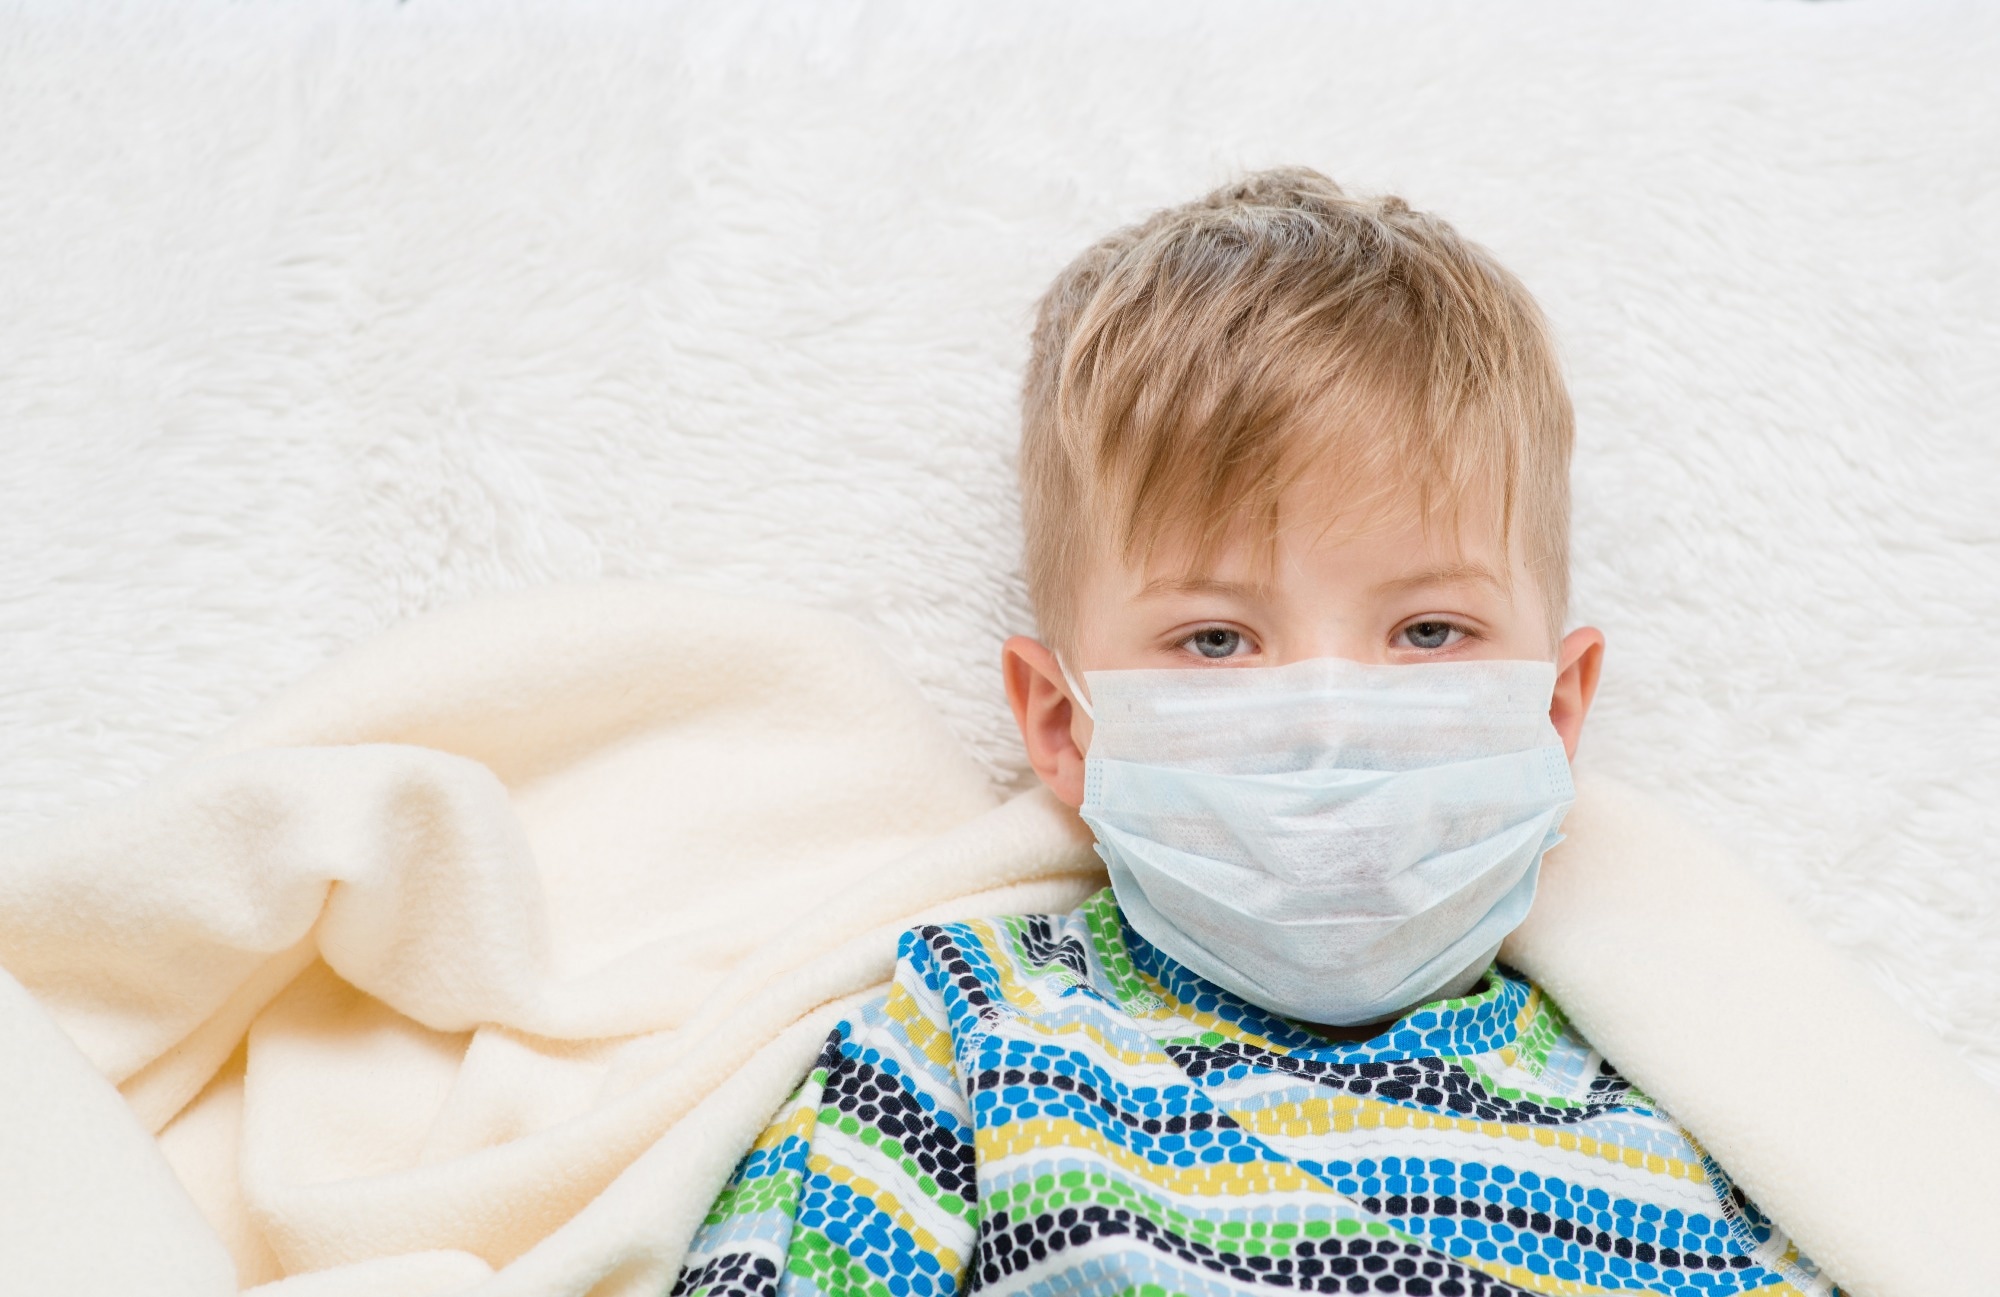 Study: Hospital admissions linked to SARS-CoV-2 infection in children and adolescents: cohort study of 3.2 million first ascertained infections in England. Image Credit: Ermolaev Alexander / Shutterstock.com